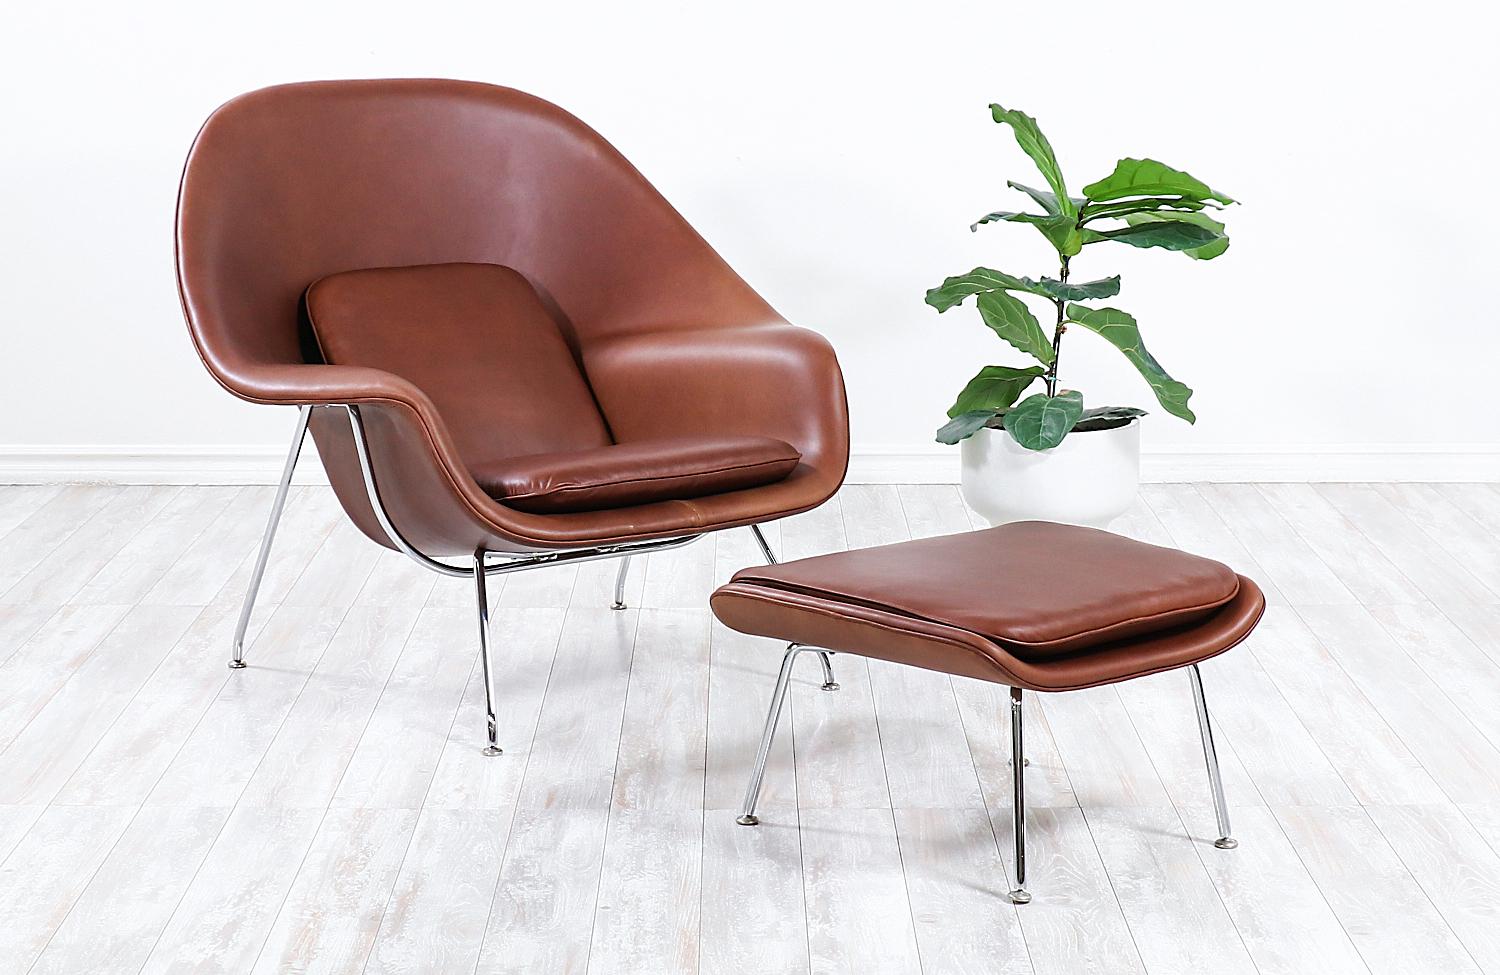 Iconic “Womb” chair and ottoman designed by Eero Saarinen for Knoll Inc. In the United States in 1948. This spectacular chair was initially requested by Florence Knoll, mentioning she wanted 